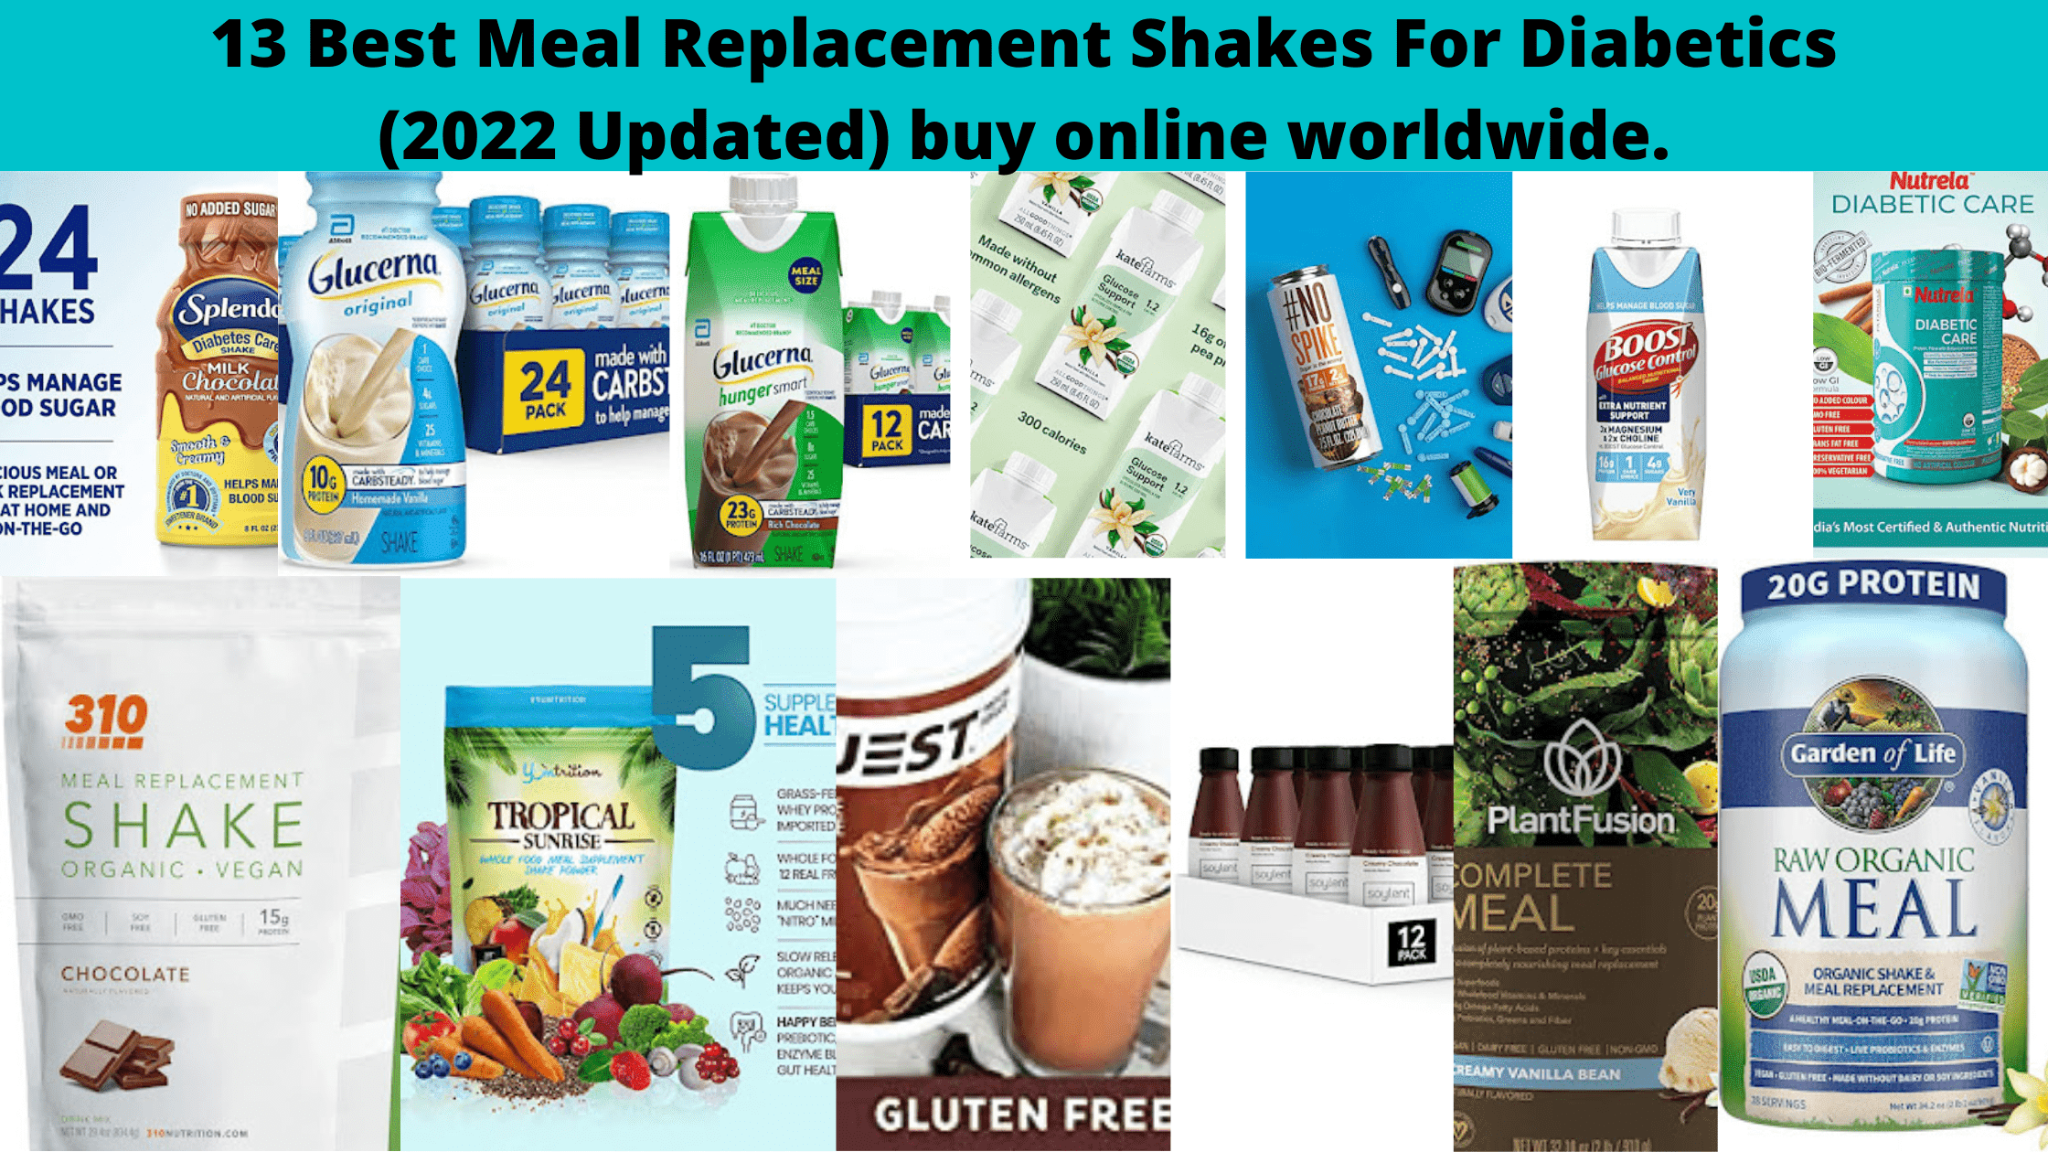 13 Best Meal Replacement Shakes For Diabetics (2022 Updated) buy online worldwide.